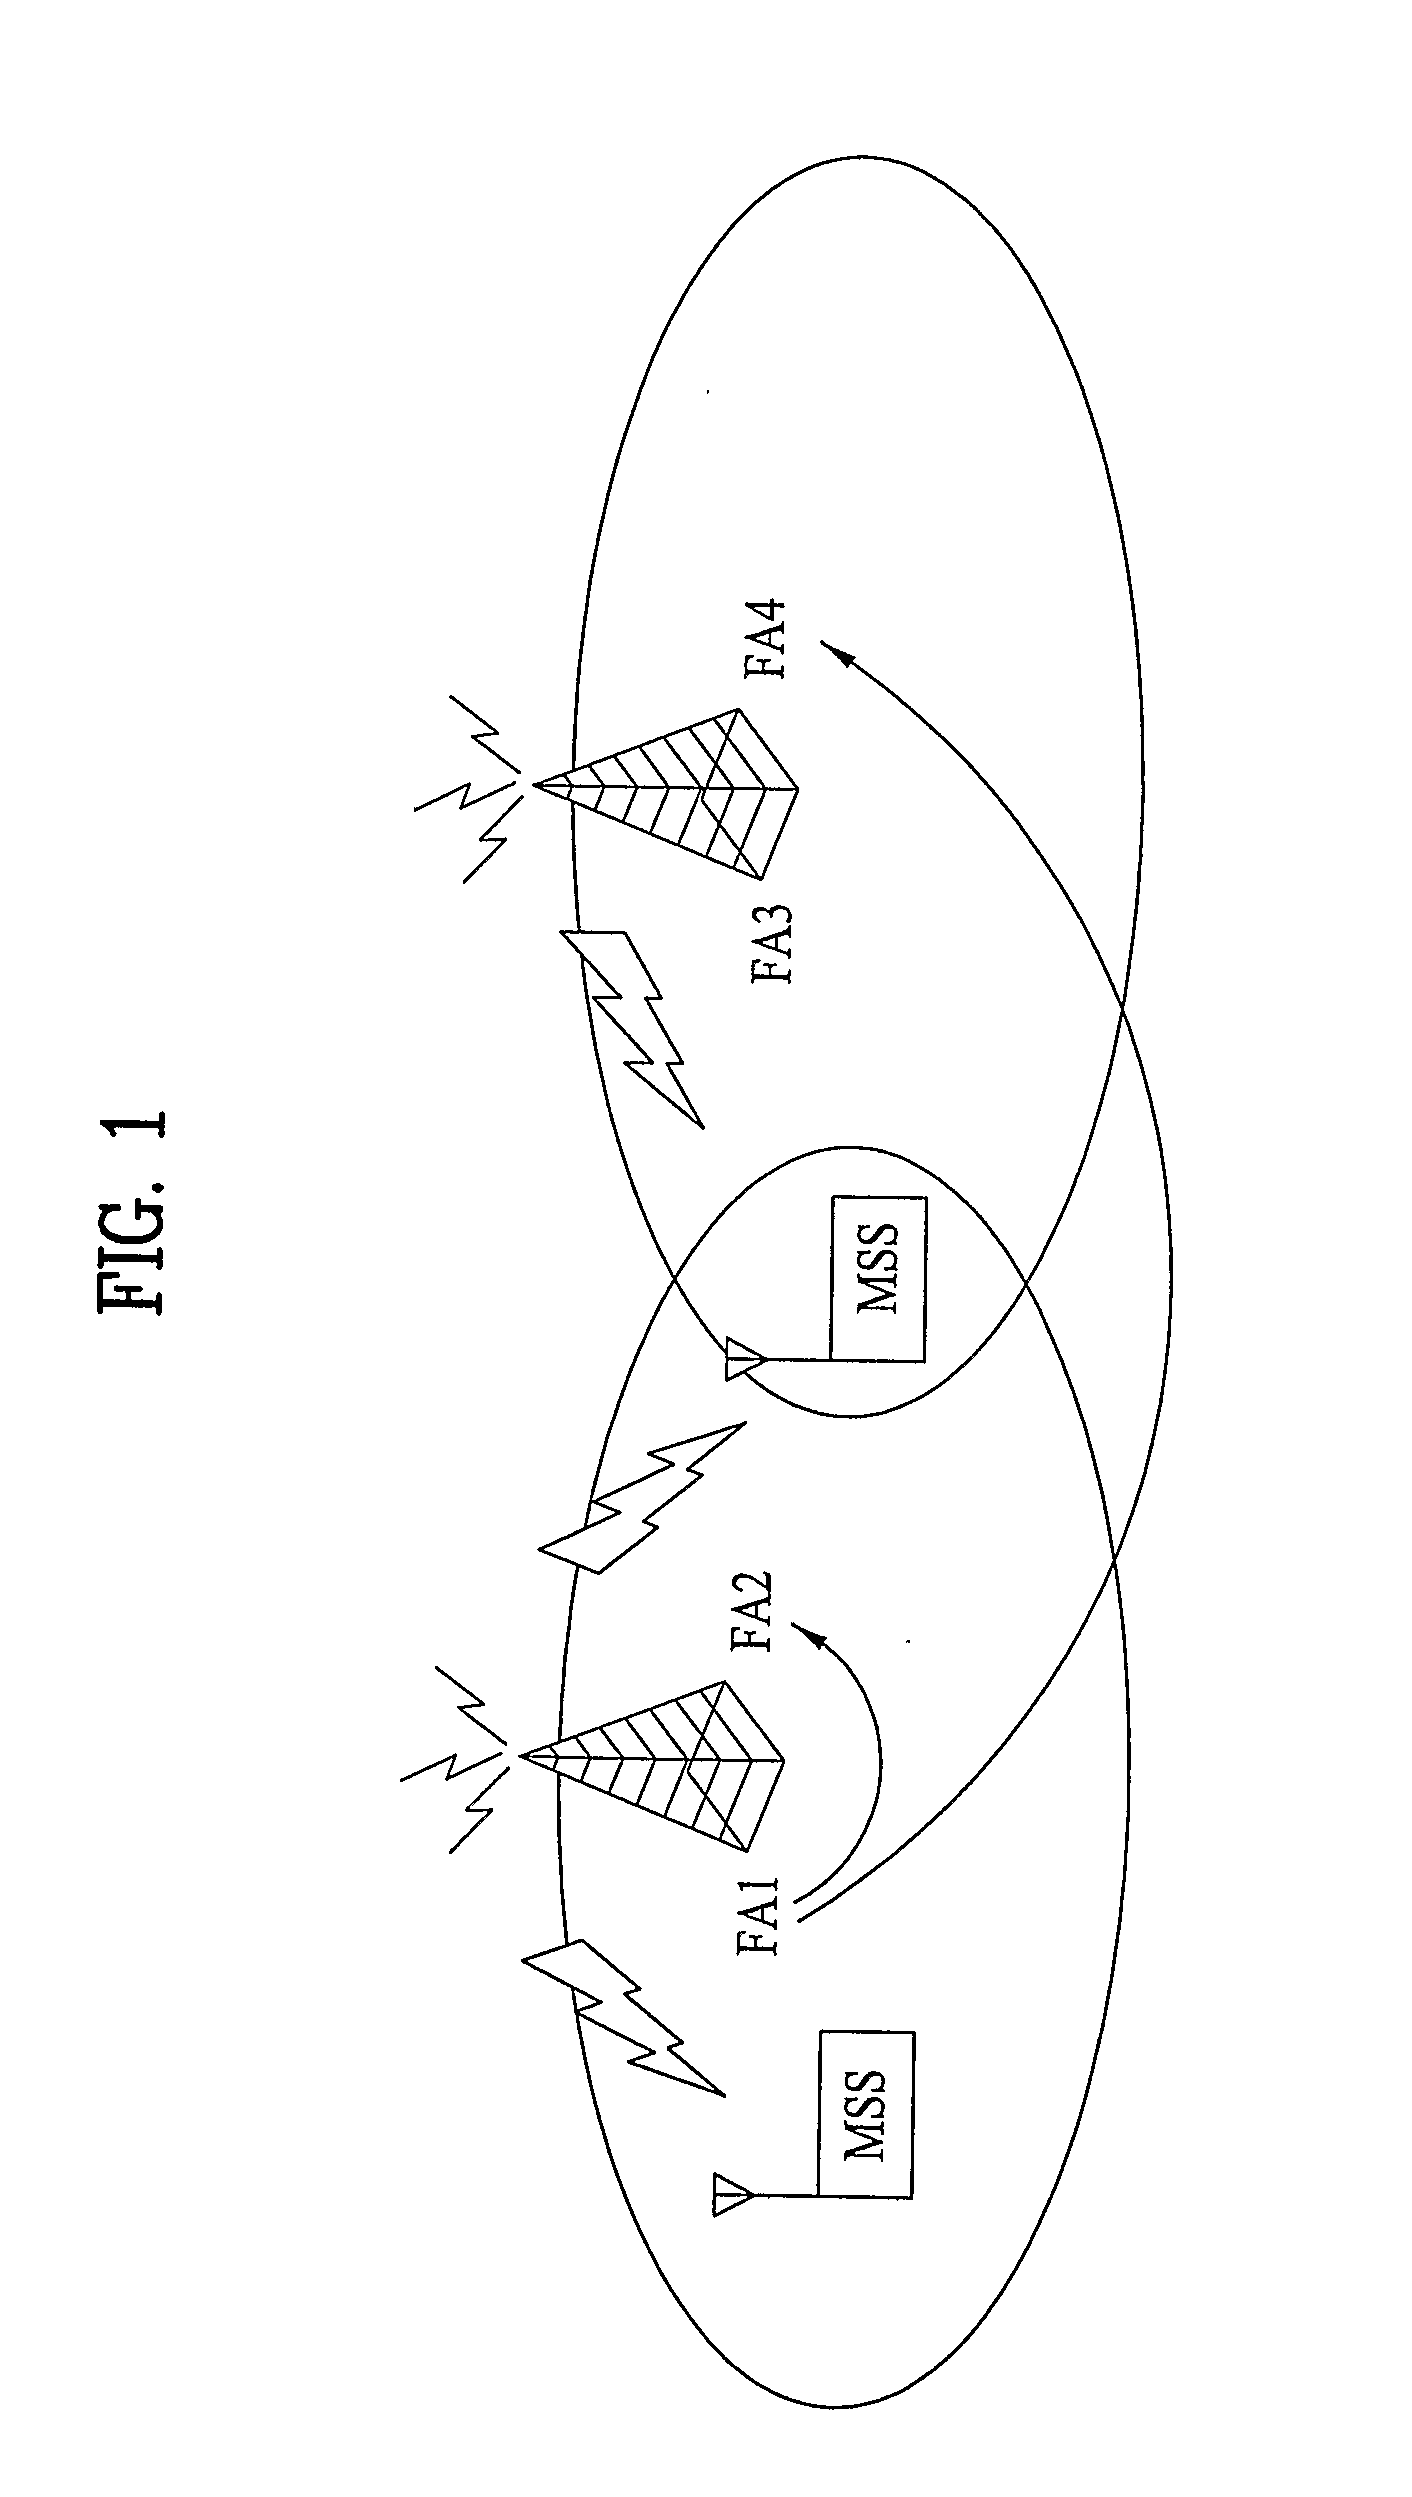 Method for Handover Between Frequency Allocation in Broadband Wireless Access System